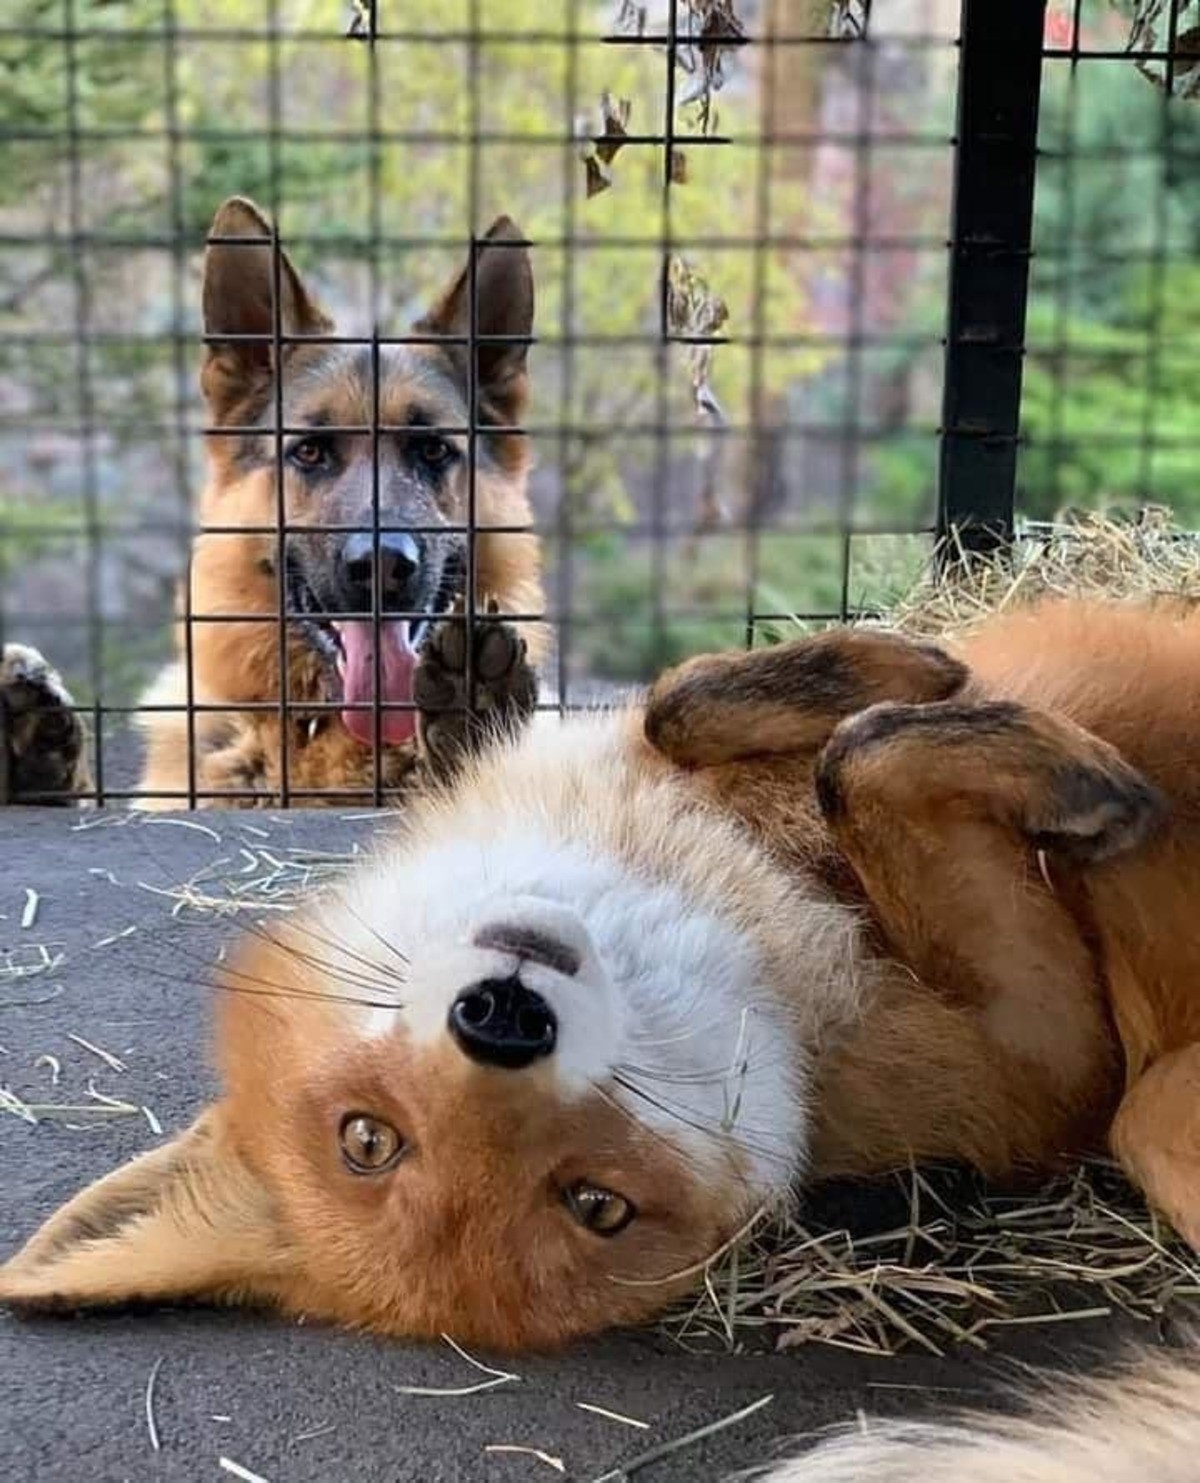 phocks. join list: RescueCritters (53 subs)Mention History Rupert and Remus at Highland Fox Sanctuary..  They look like good friends